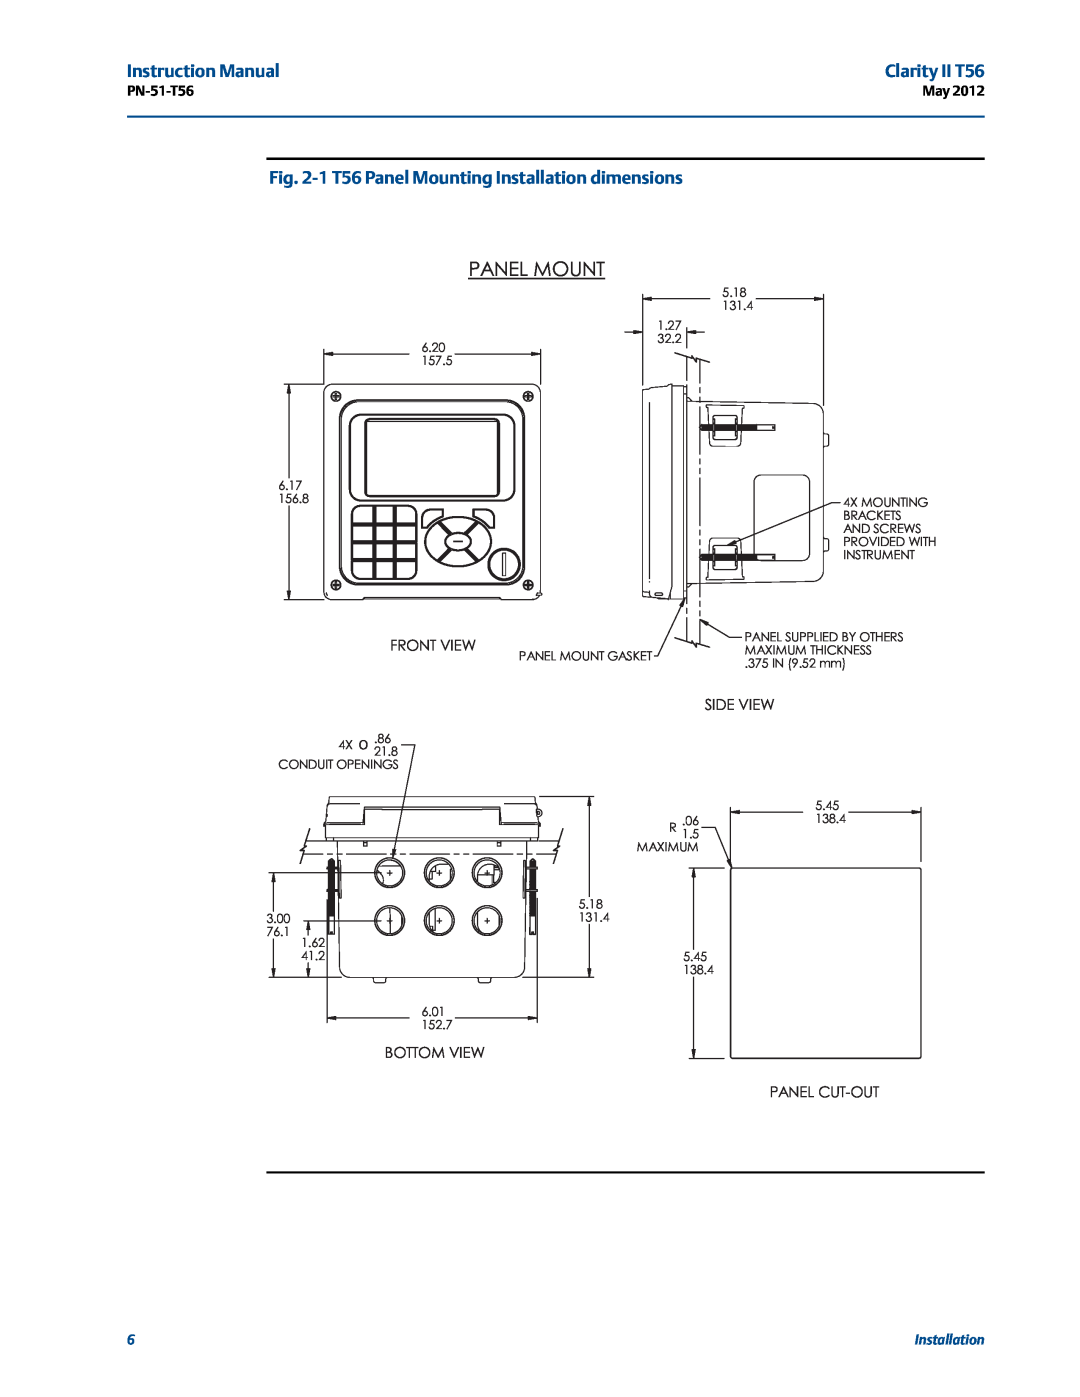 Emerson PN-51-T56 instruction manual 1 T56 Panel Mounting Installation dimensions, Clarity II T56 